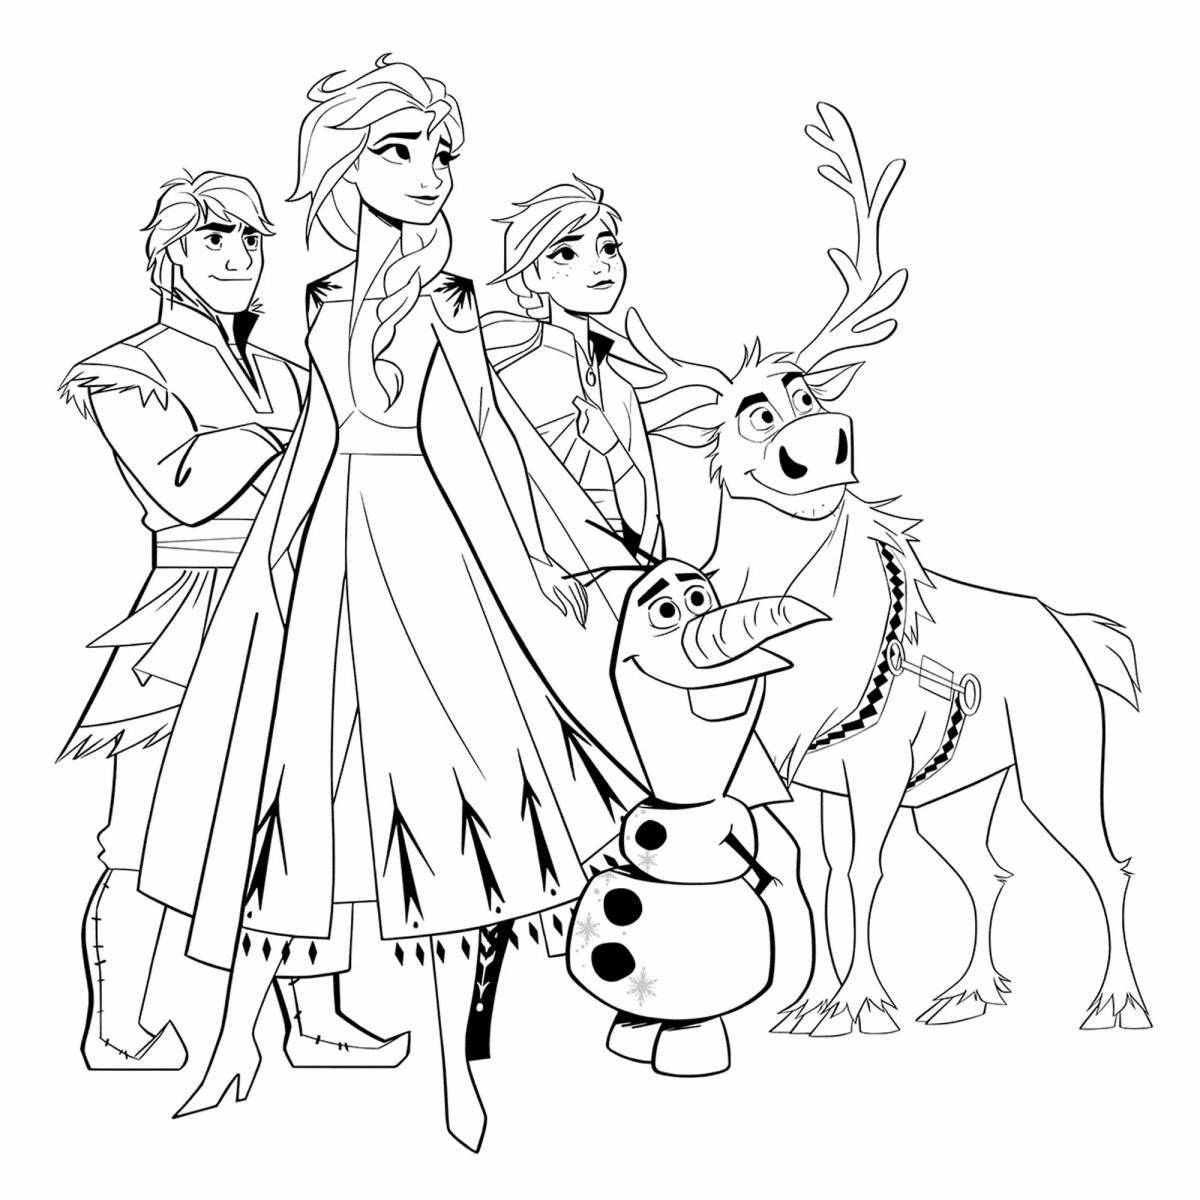 Glitter Frozen coloring book for 5-6 year olds